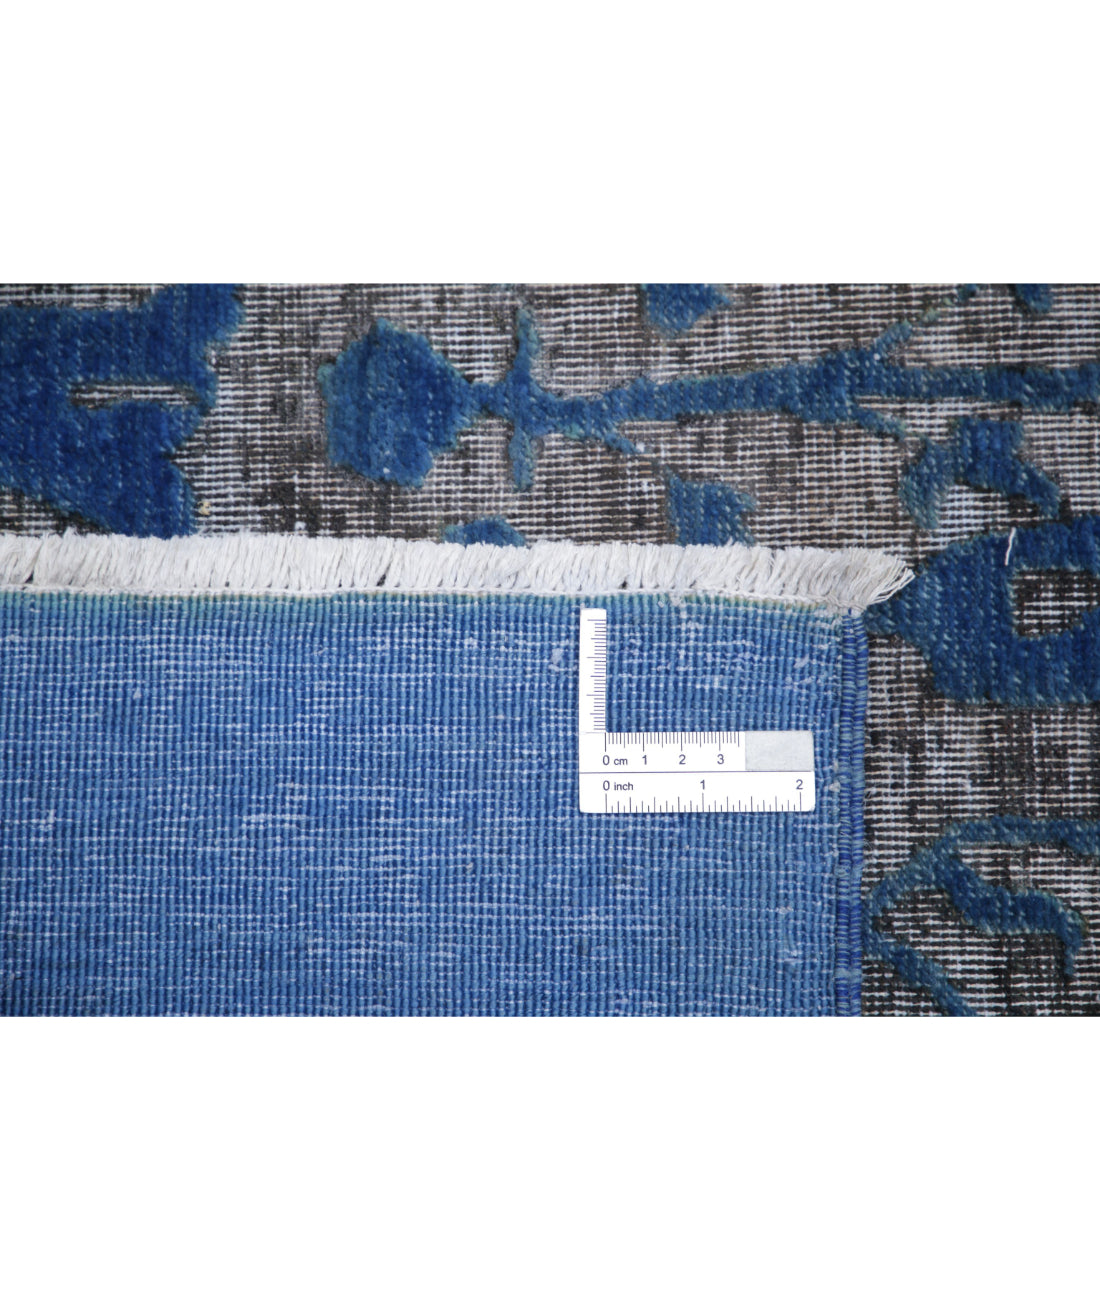 Hand Knotted Onyx Wool Rug - 5'11'' x 8'4'' 5'11'' x 8'4'' (178 X 250) / Blue / Blue